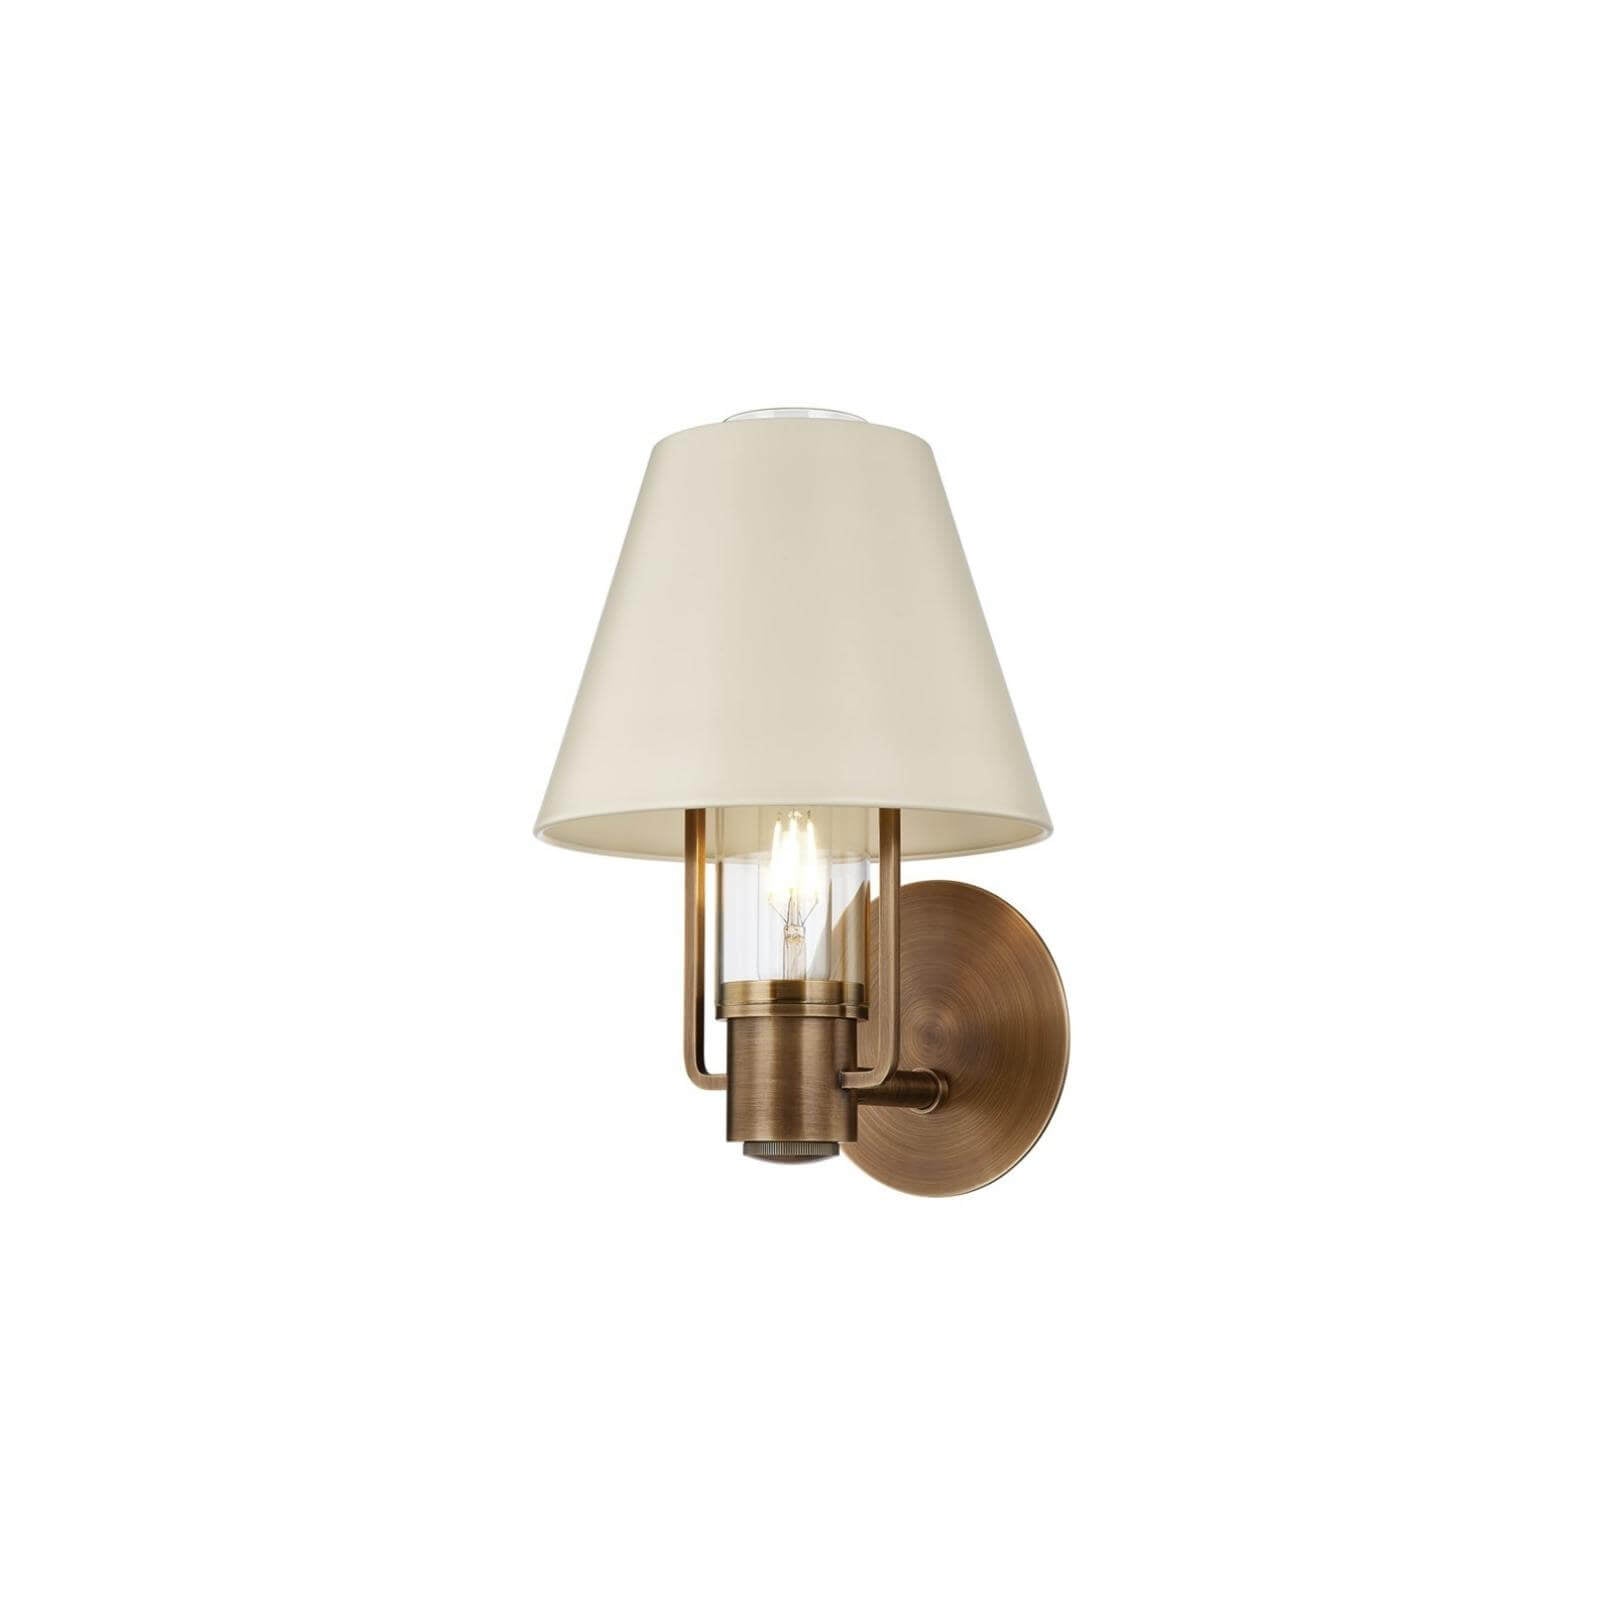 Brass wall sconce with ivory lamp shade